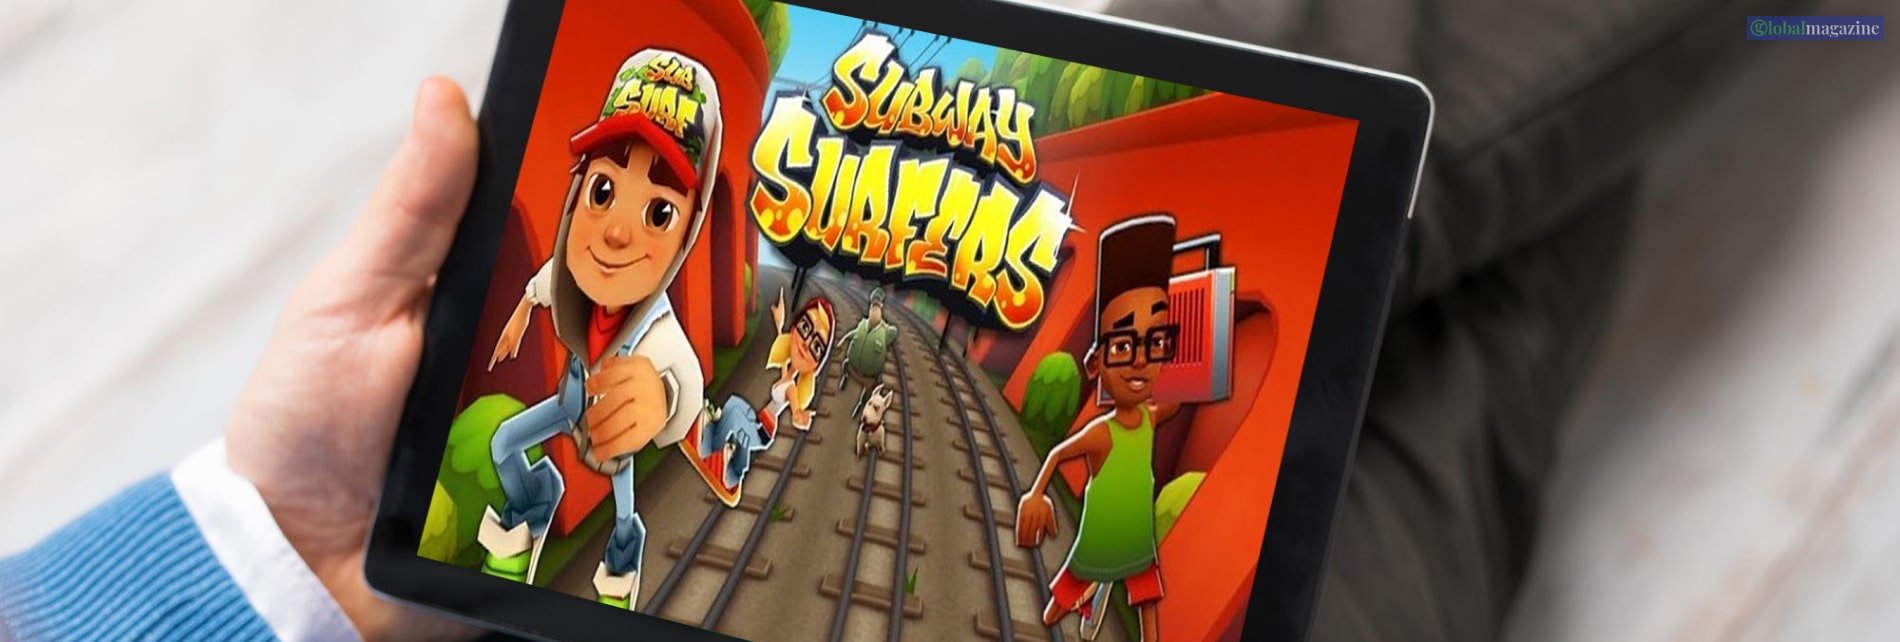 where to play subway surfer unblocked｜TikTok Search